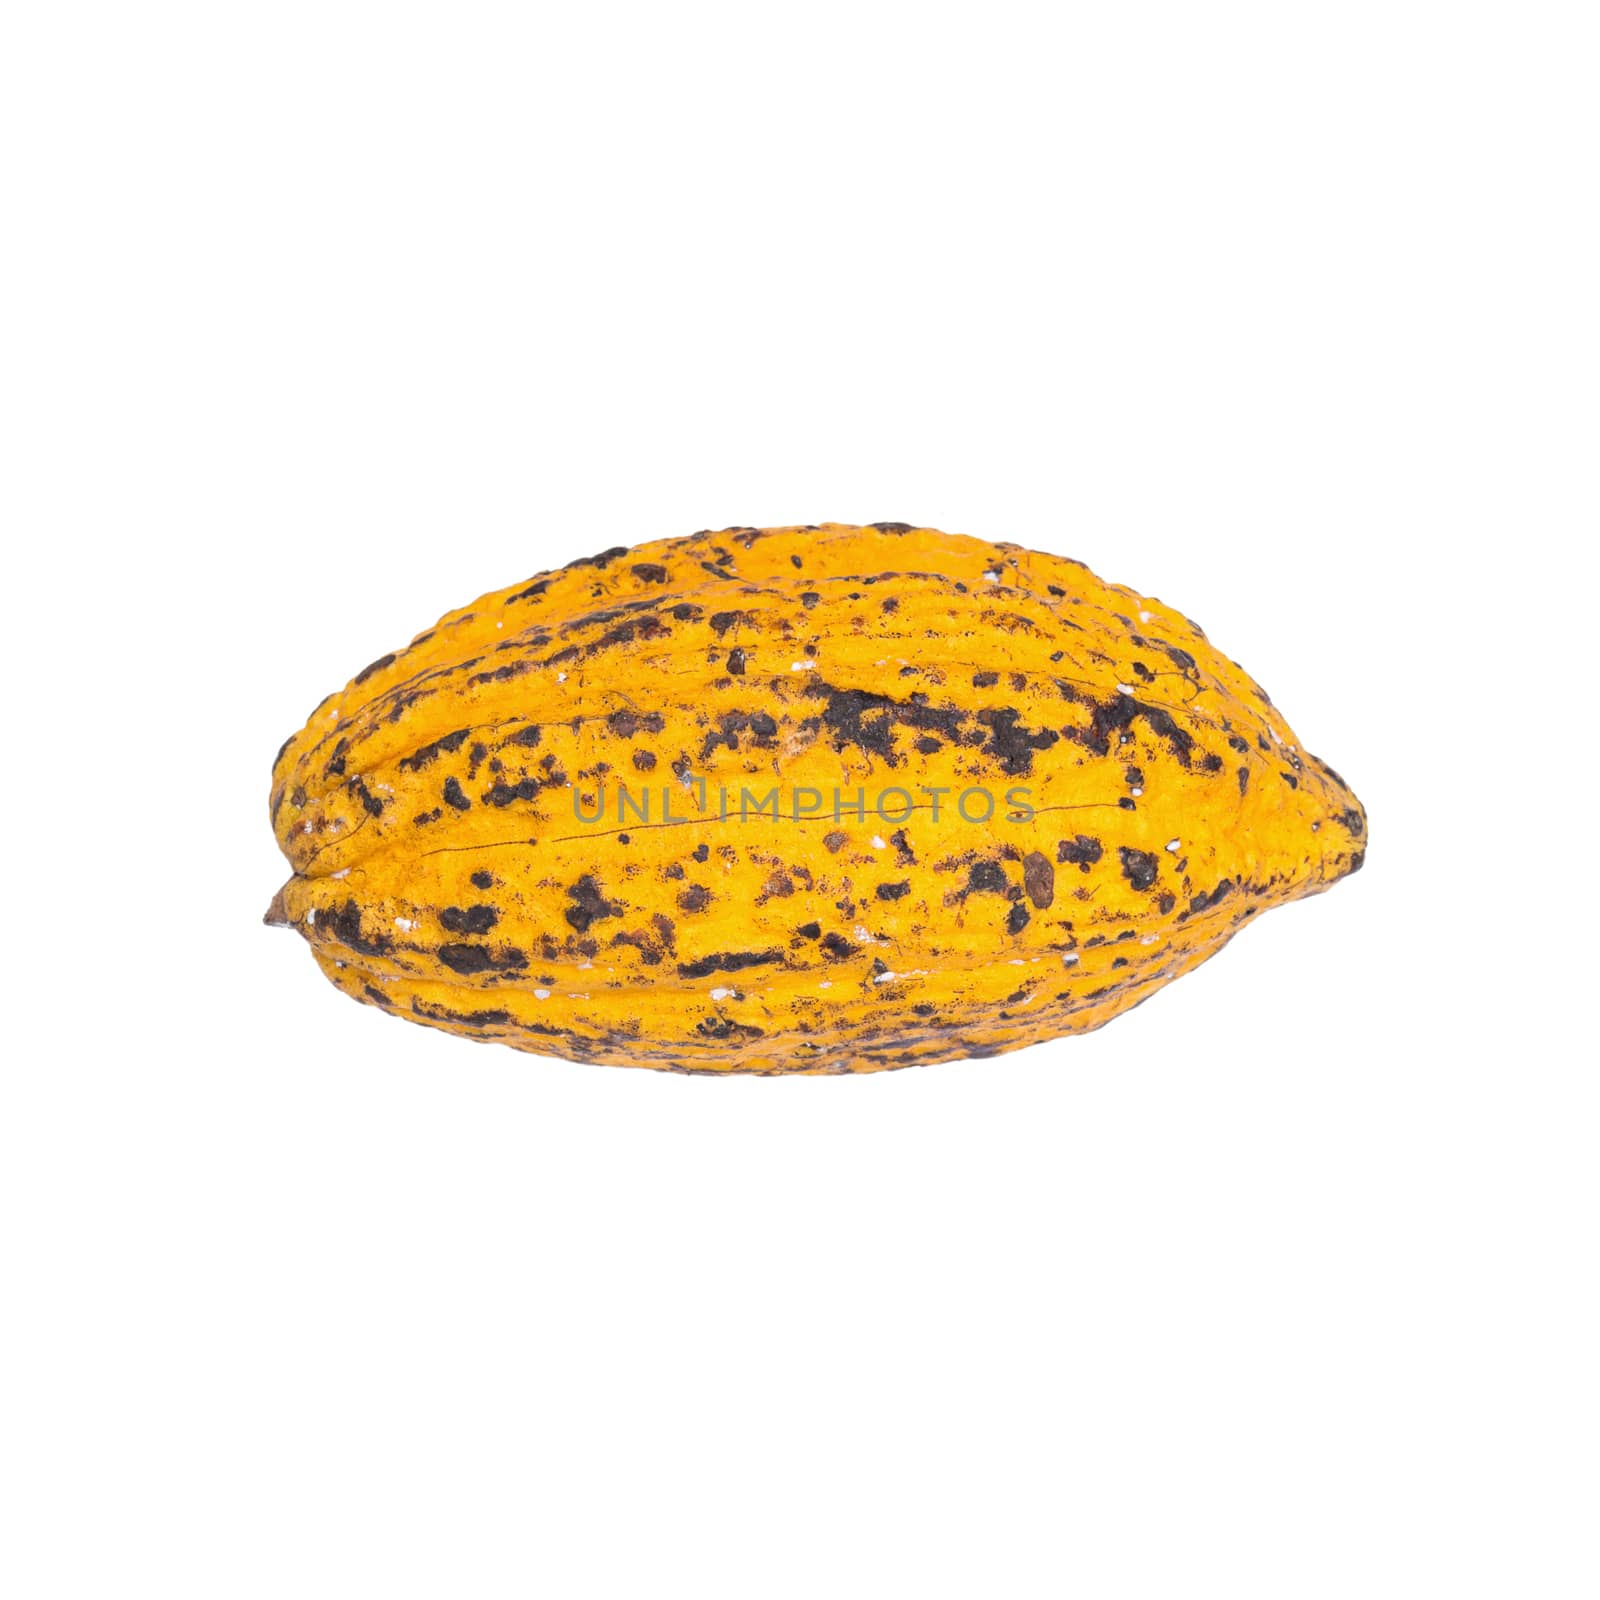 Cacao fruit, raw cacao beans, Cocoa pod isolated on white background.